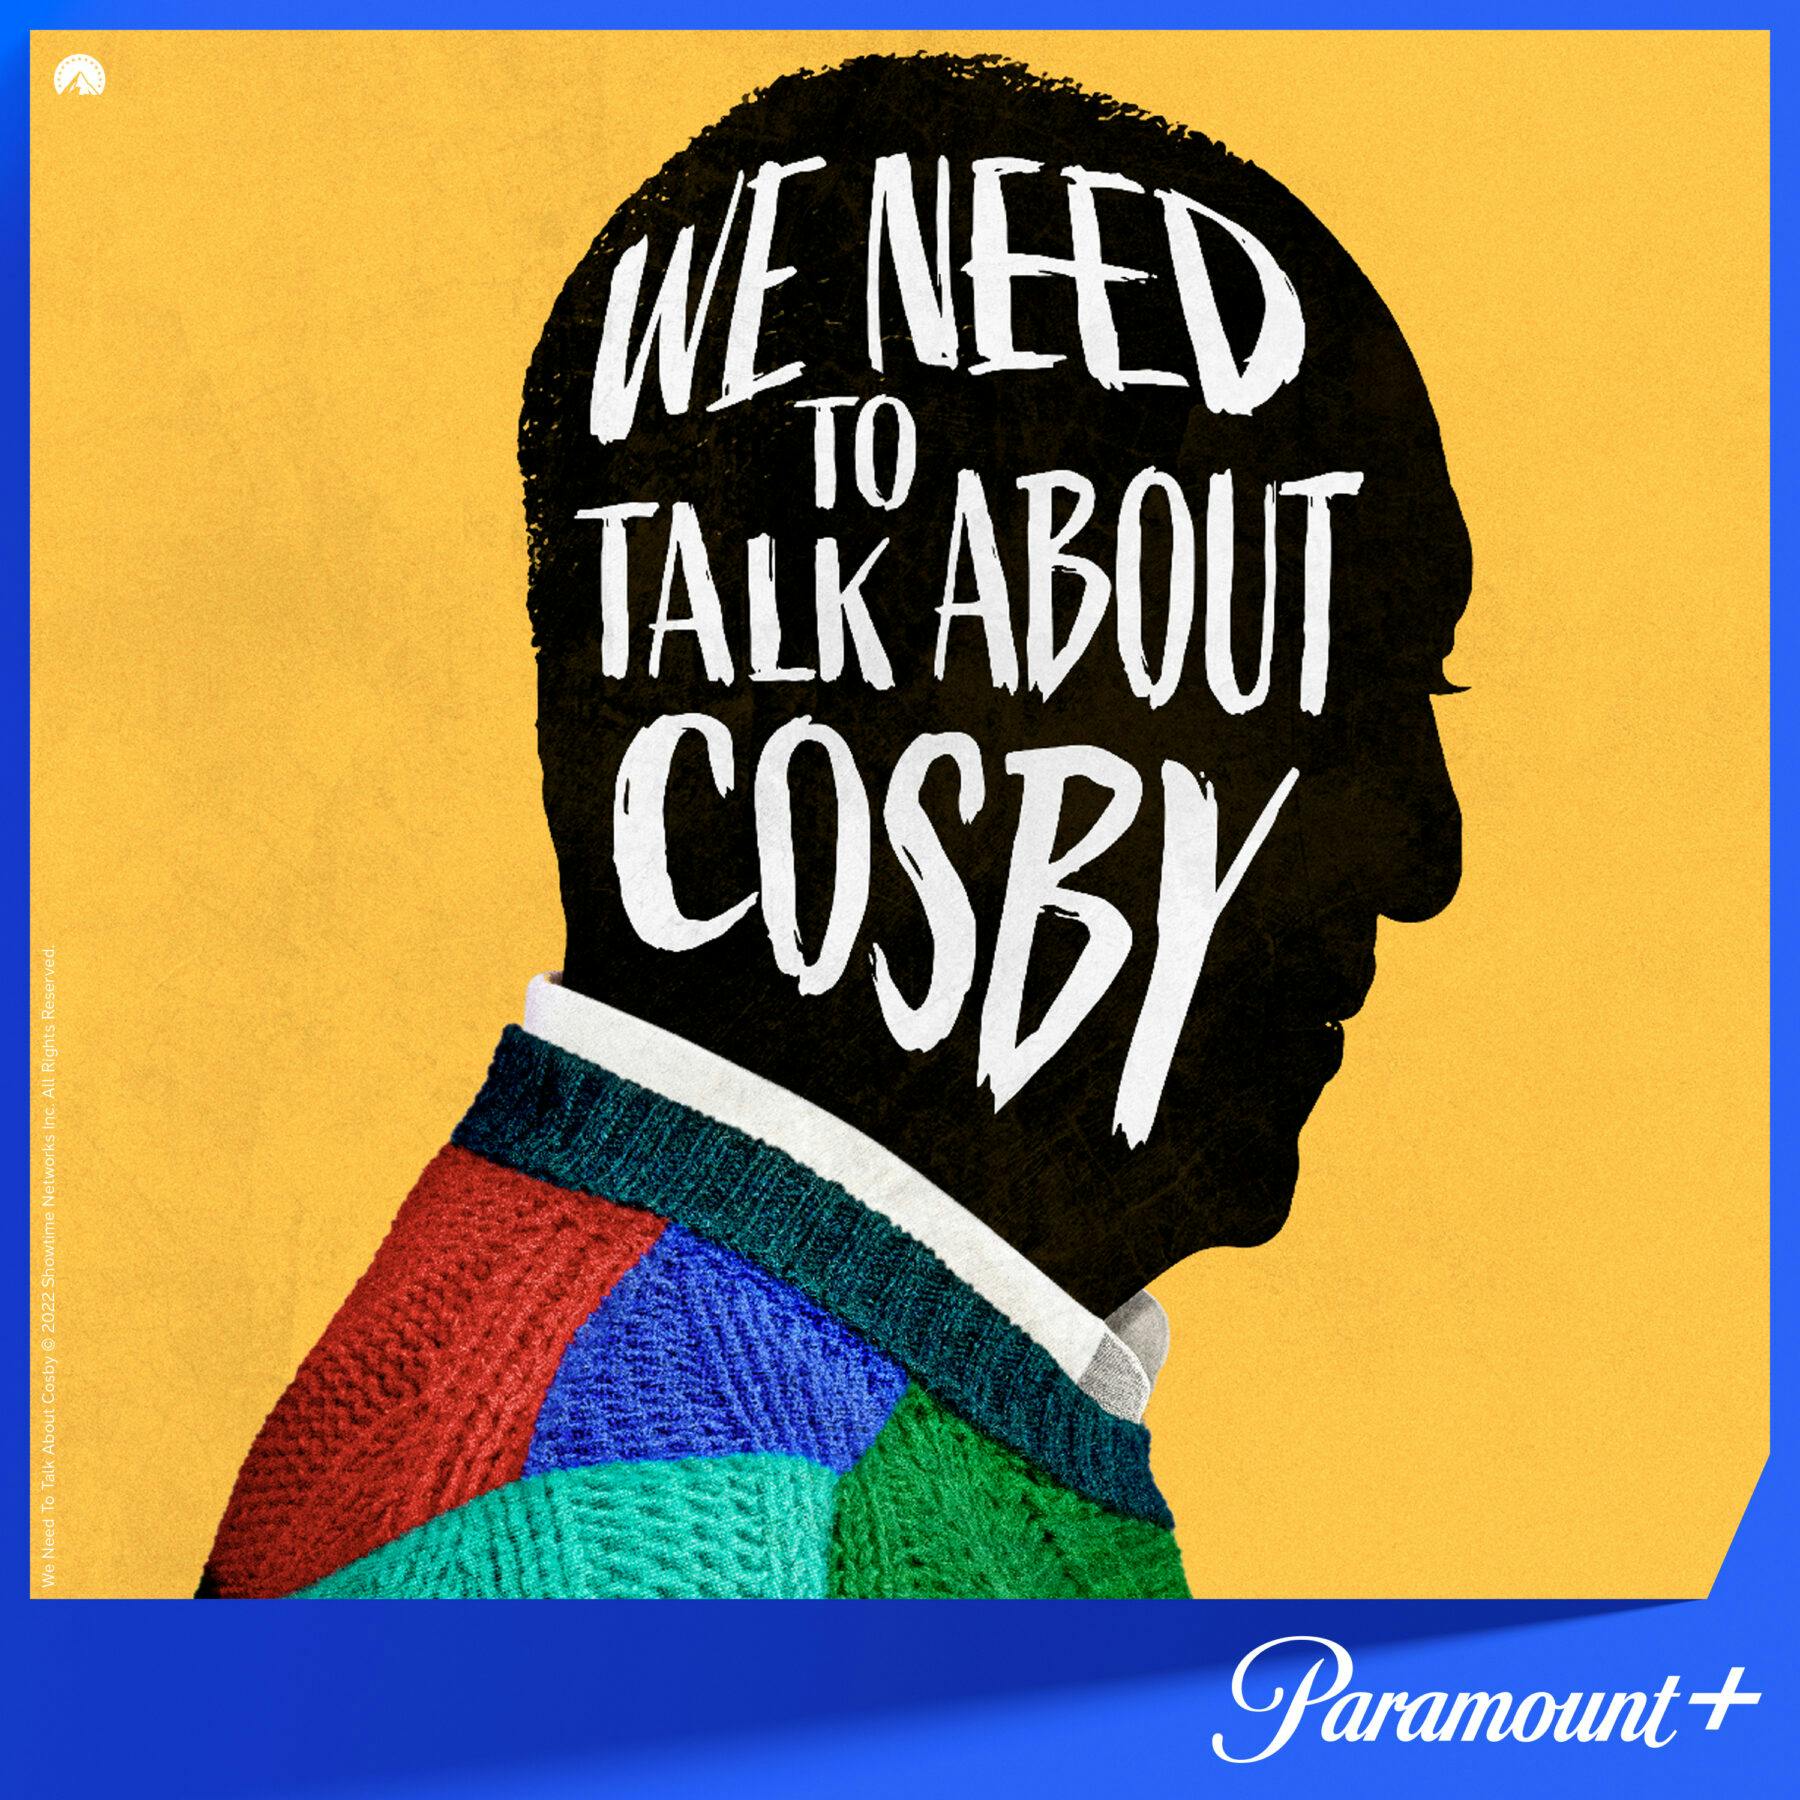 https://imgix.vielskerserier.dk/2022/02/P_We_Need_To_Talk_About_Cosby_1_1_3000x3000px.jpg